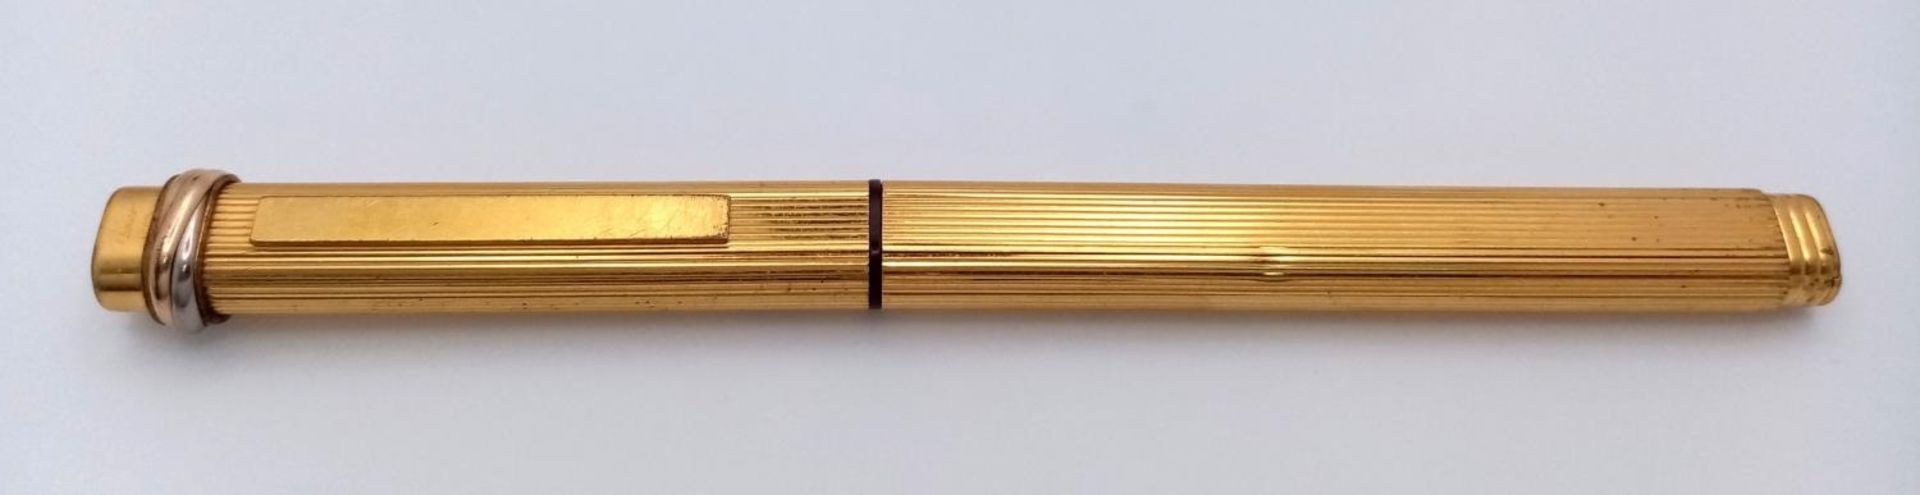 A CARTIER gold plated pen, length: 13. 7 cm, weight: 23.2 g. Ref: 17183 - Image 4 of 6